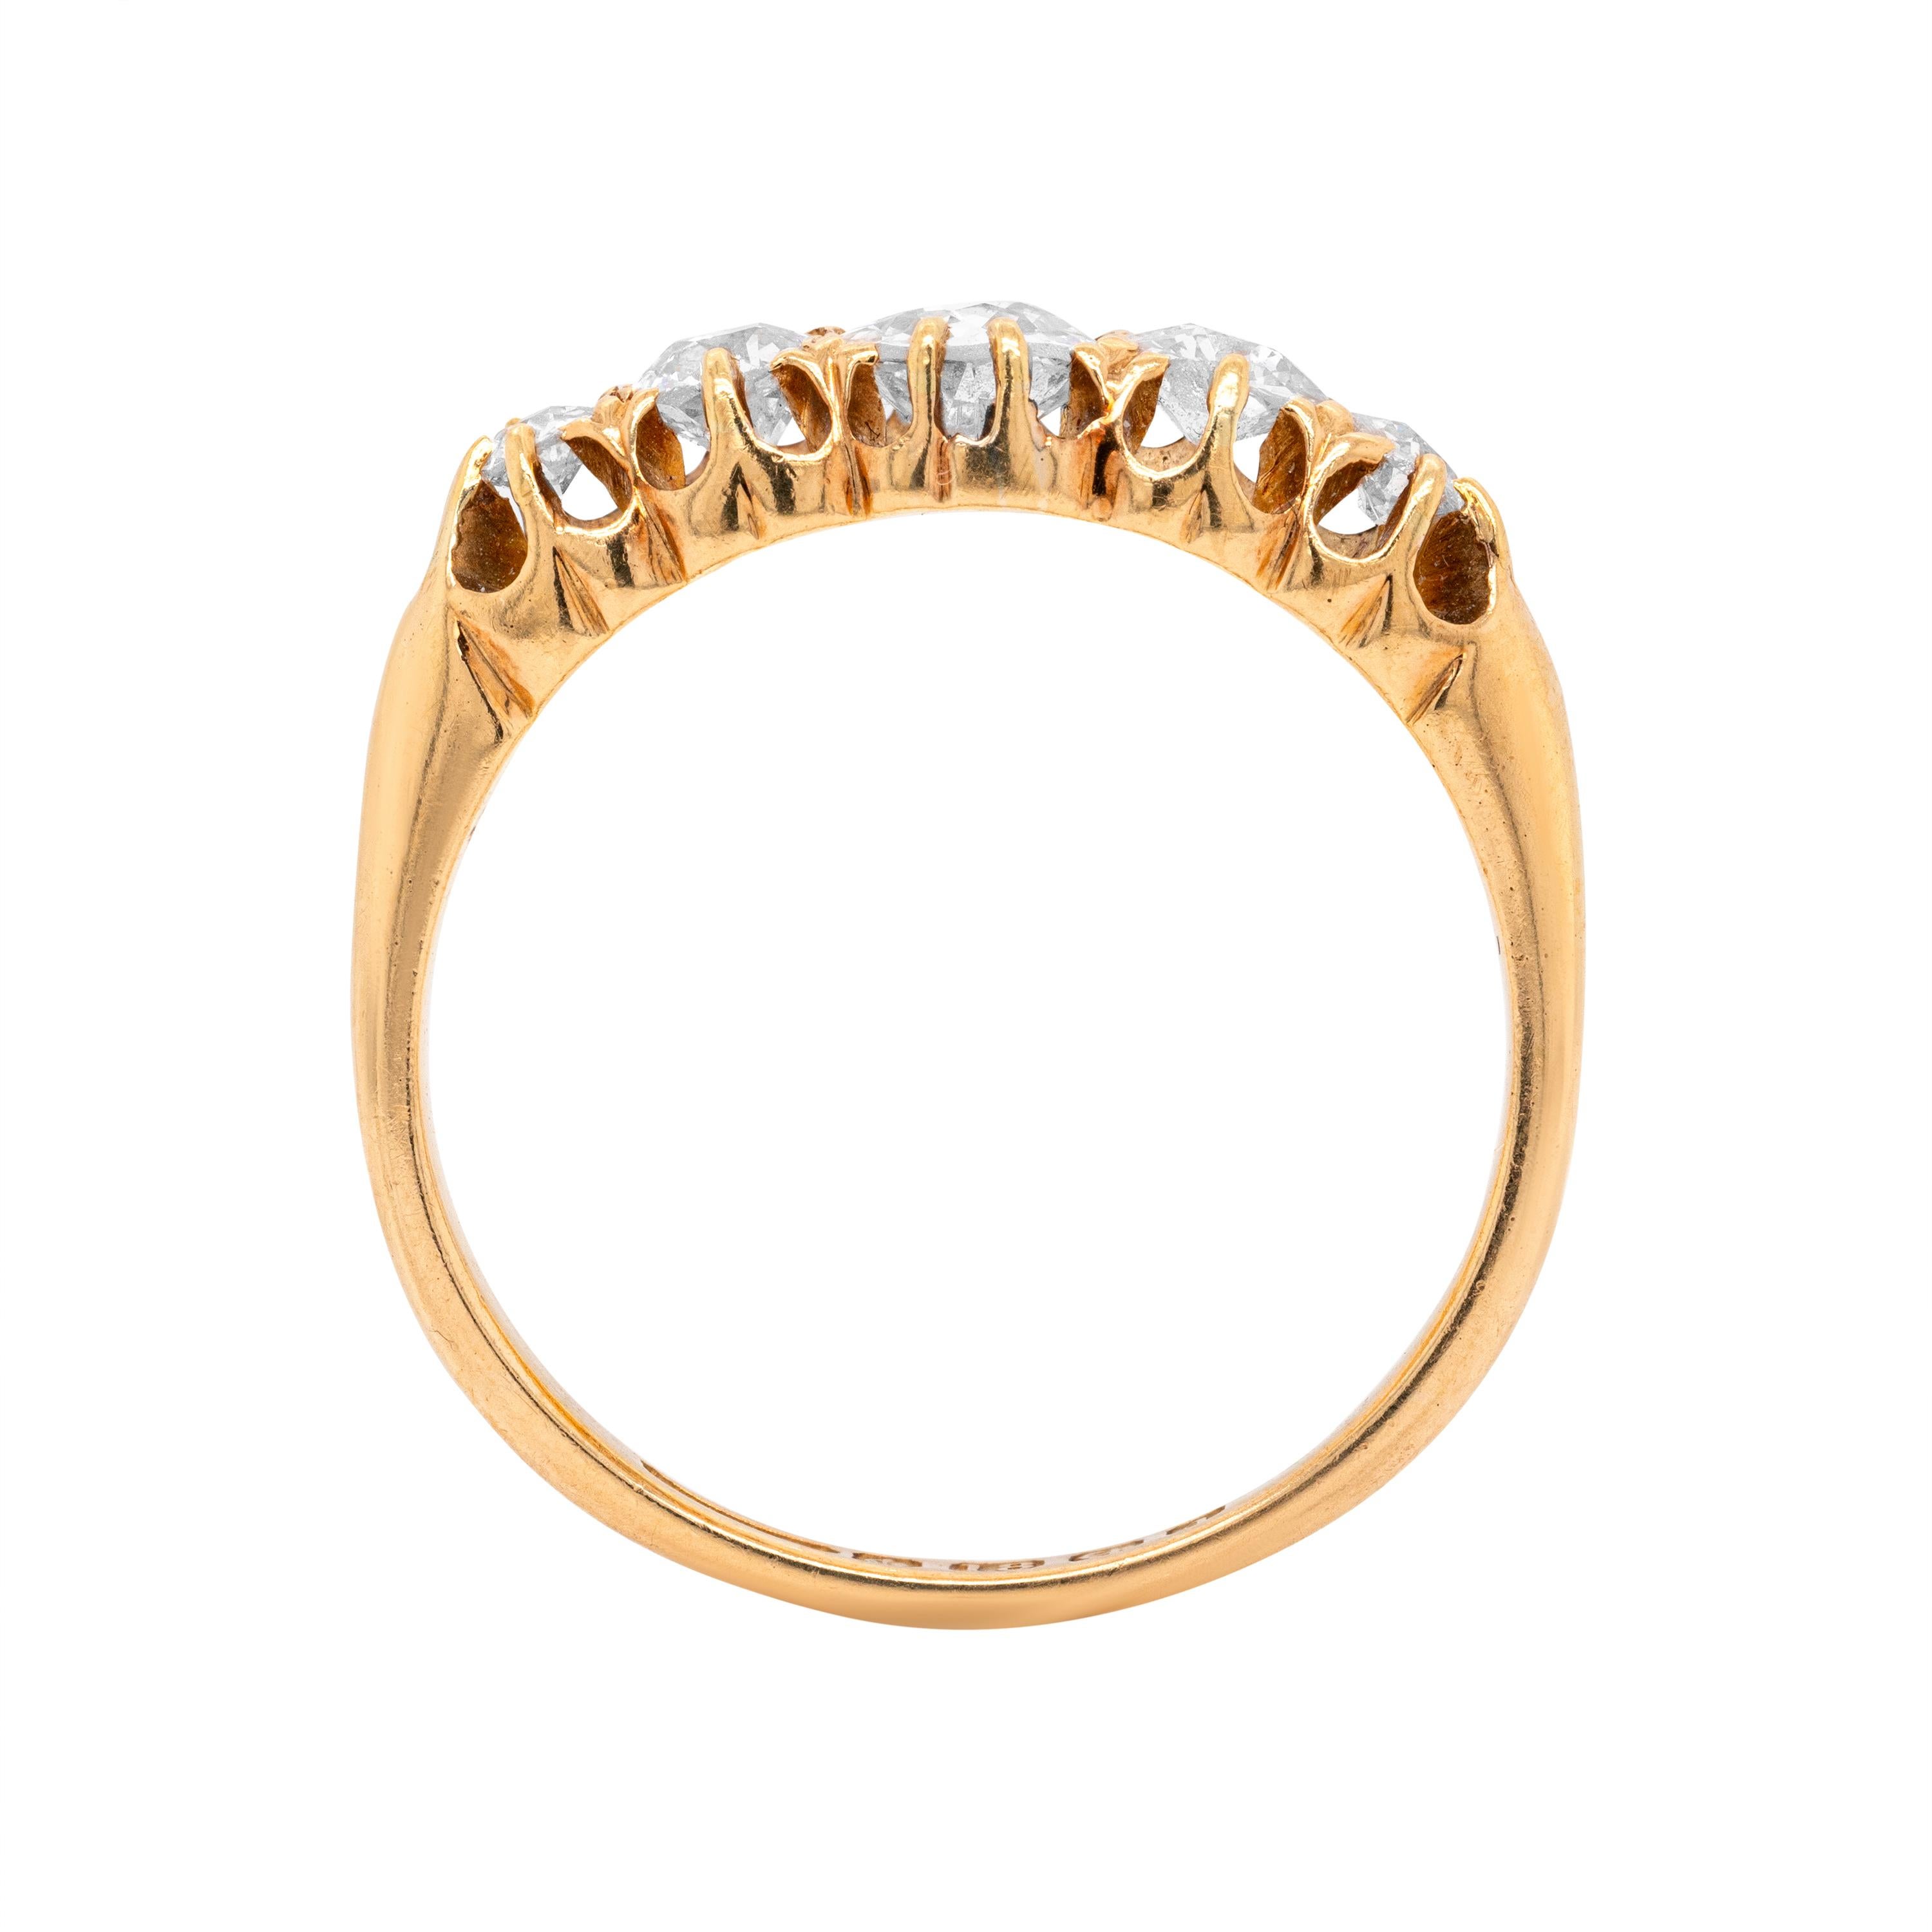 Edwardian Antique Old Cut Diamond 18 Carat Yellow Gold Five-Stone Ring, 1903 For Sale